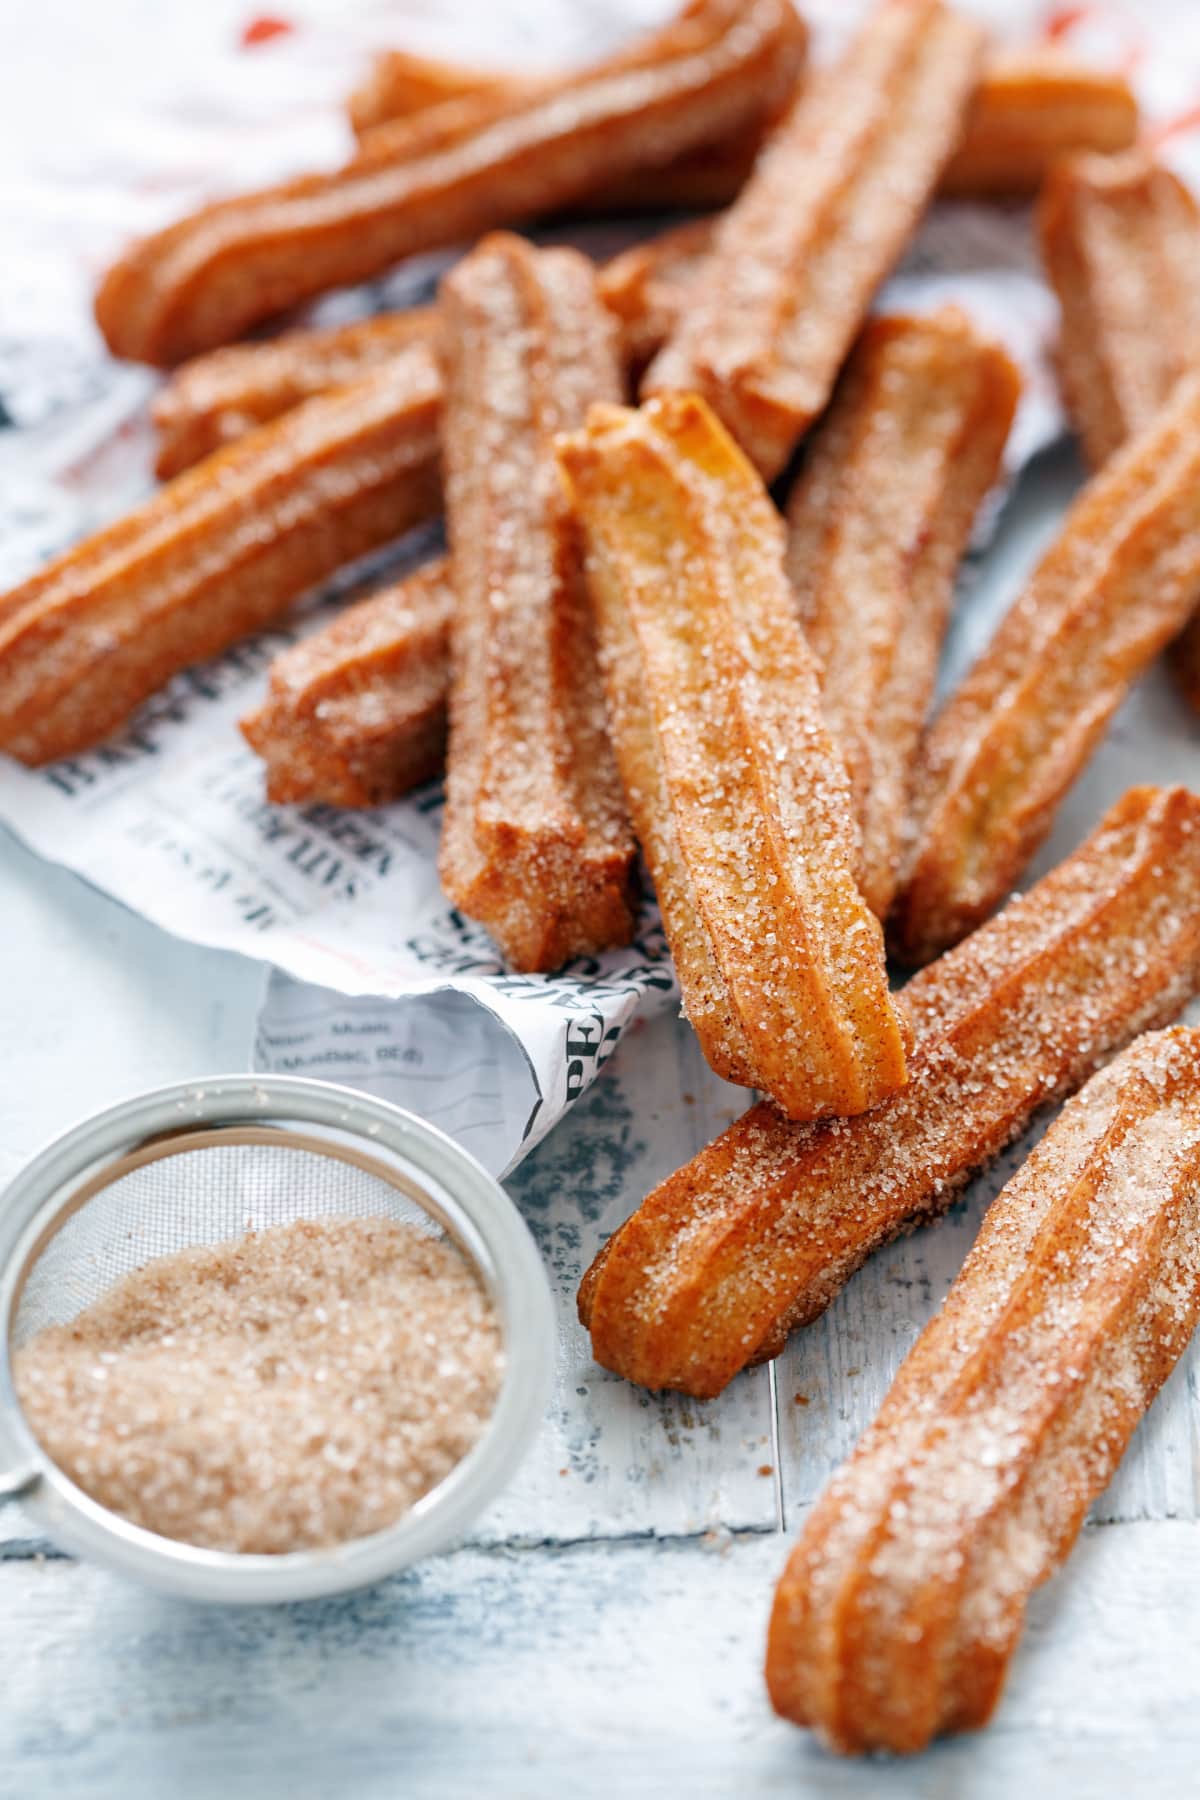 Easy Homemade Churros (Best Recipe!) featuring pile of churros sprinkled with cinnamon sugar mixture and more cinnamon sugar in a small sieve